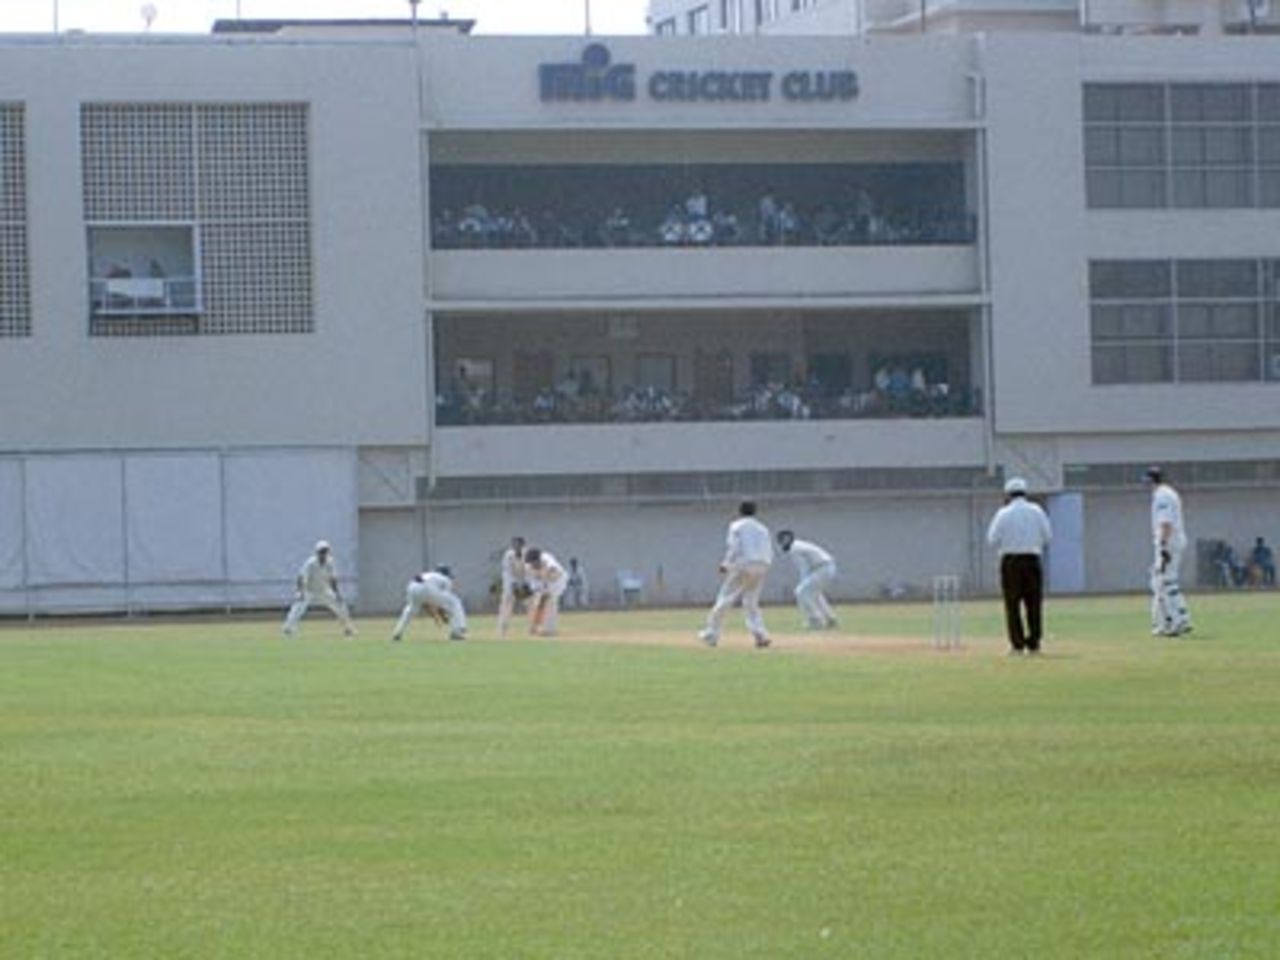 England Under-19s in India 2000/01, Rest of India Under-19s v England Under-19s Middle Income Group Ground, Bandra, Mumbai 4-6 Jan 2001